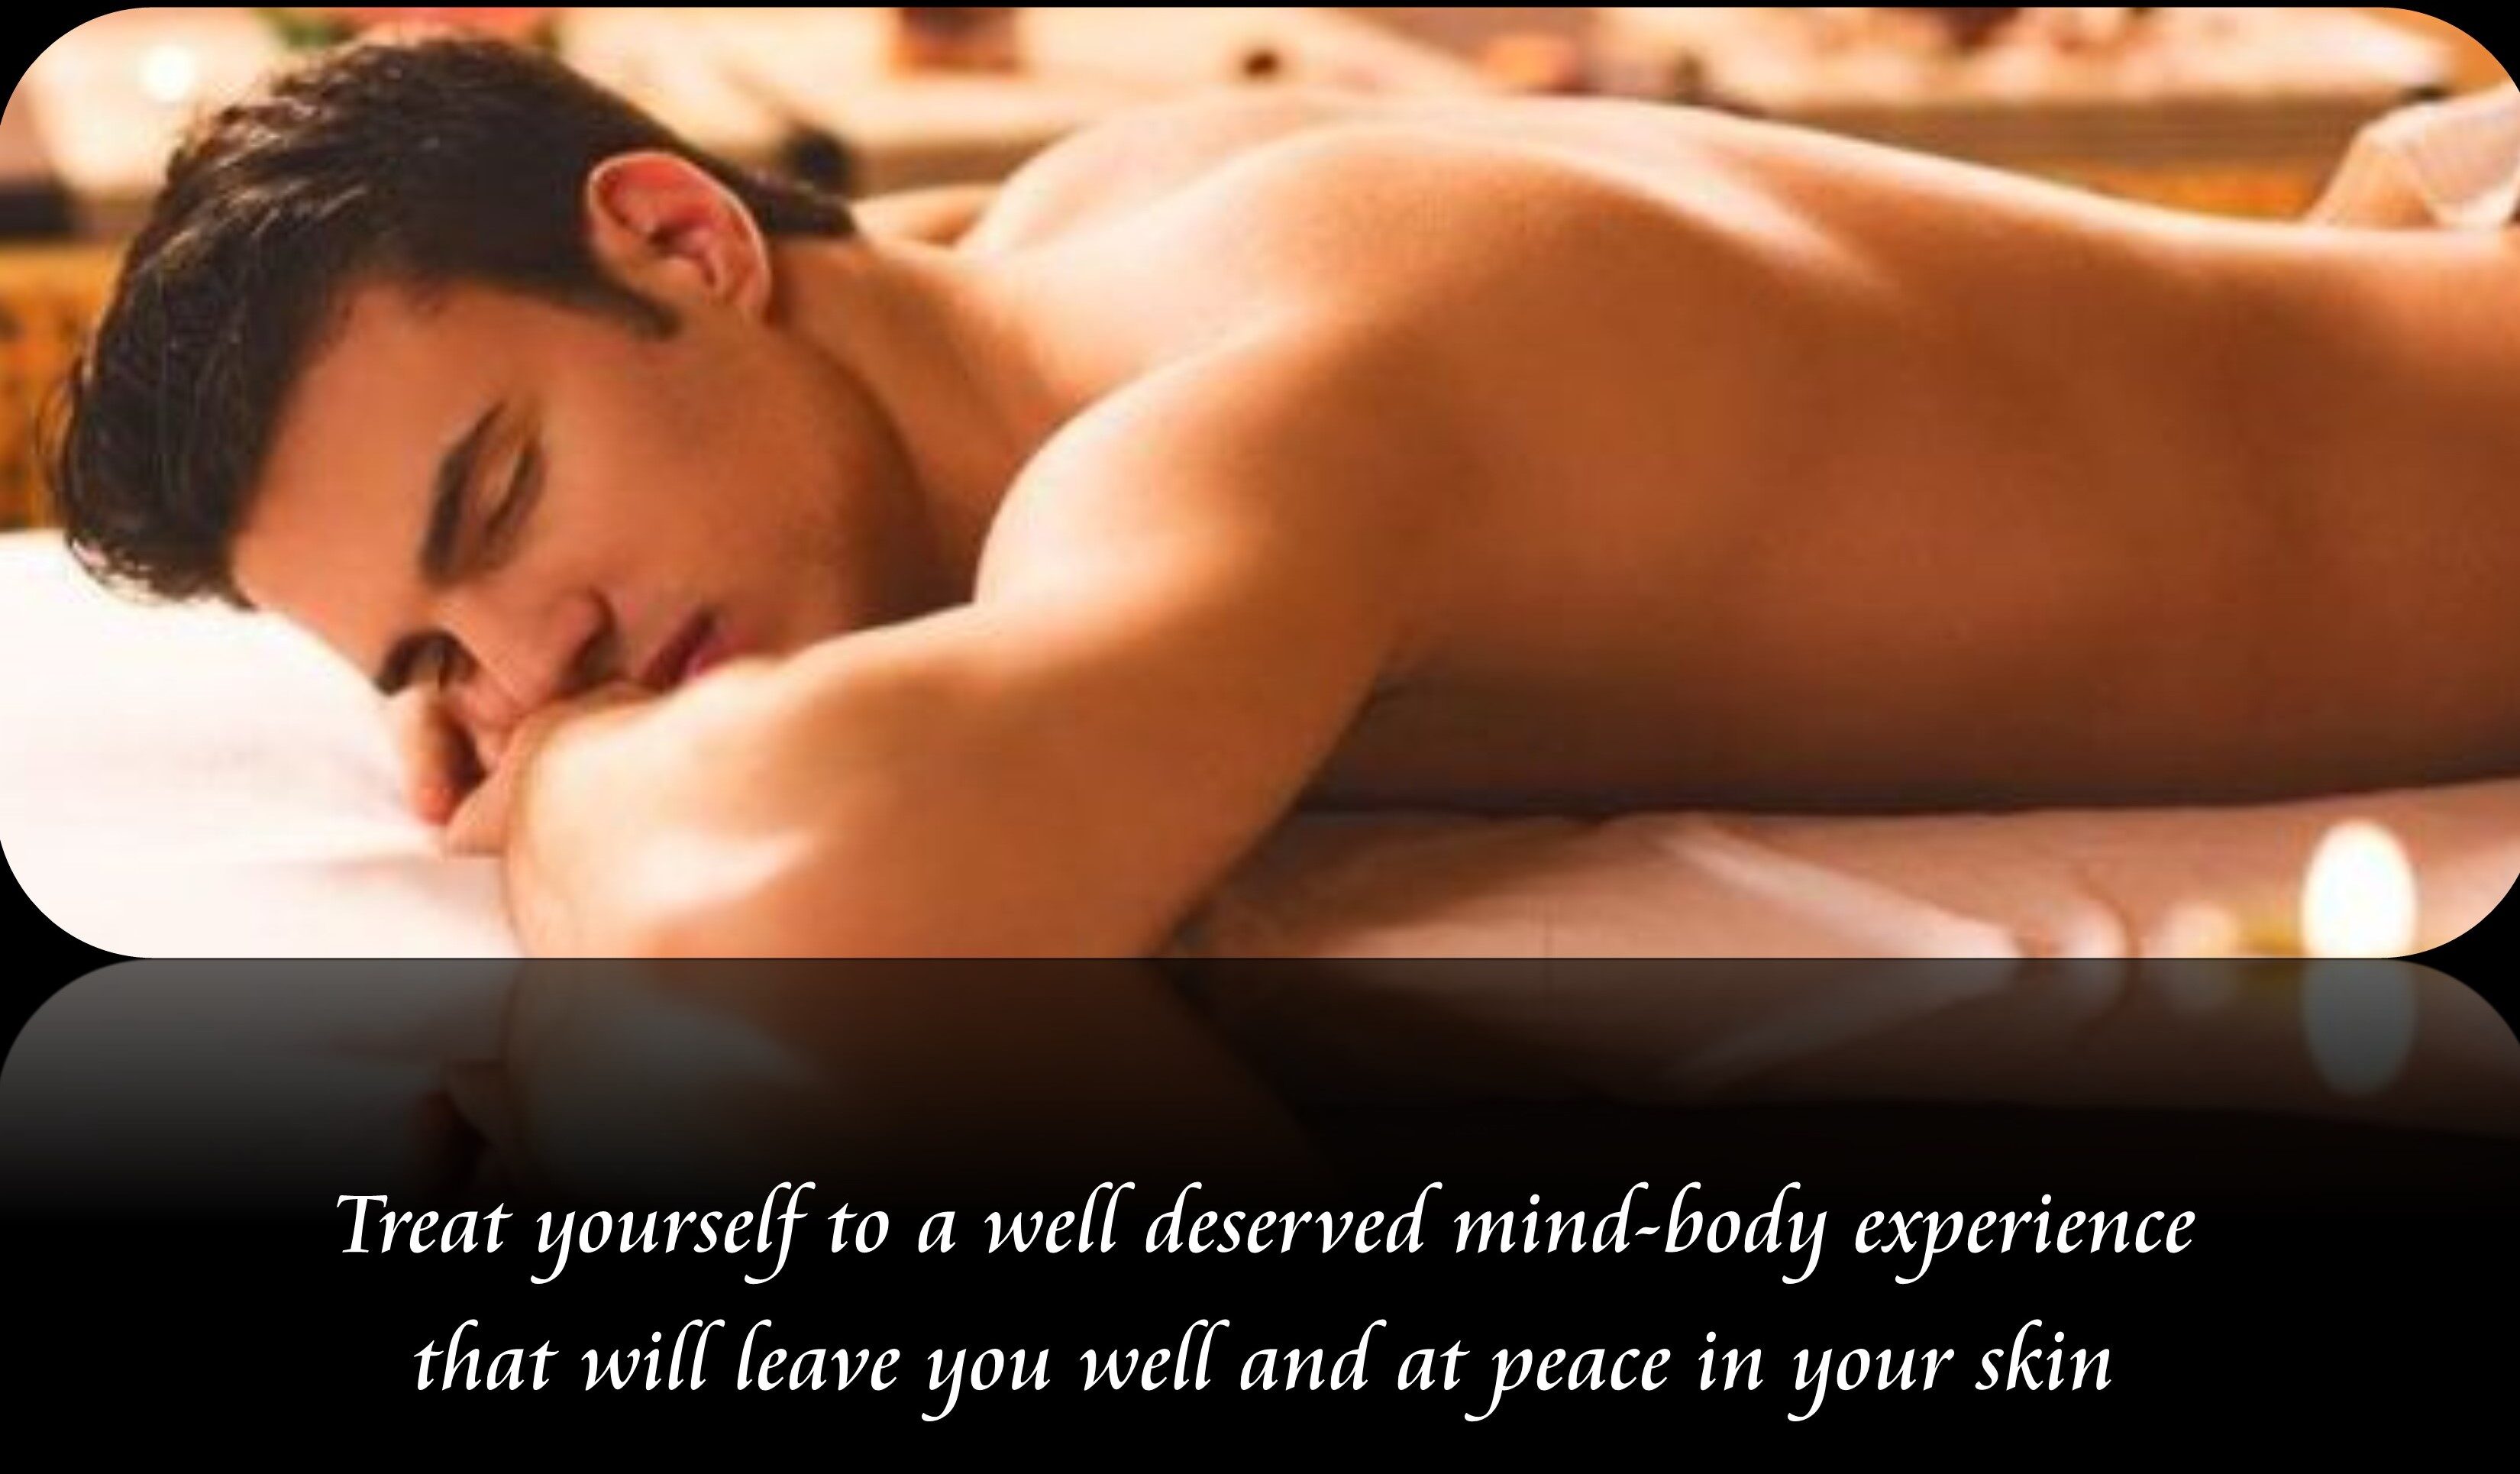 male masseur for men. Treat yourself to a well deserved mind-body experience that will leave you well and at peace in your skin.